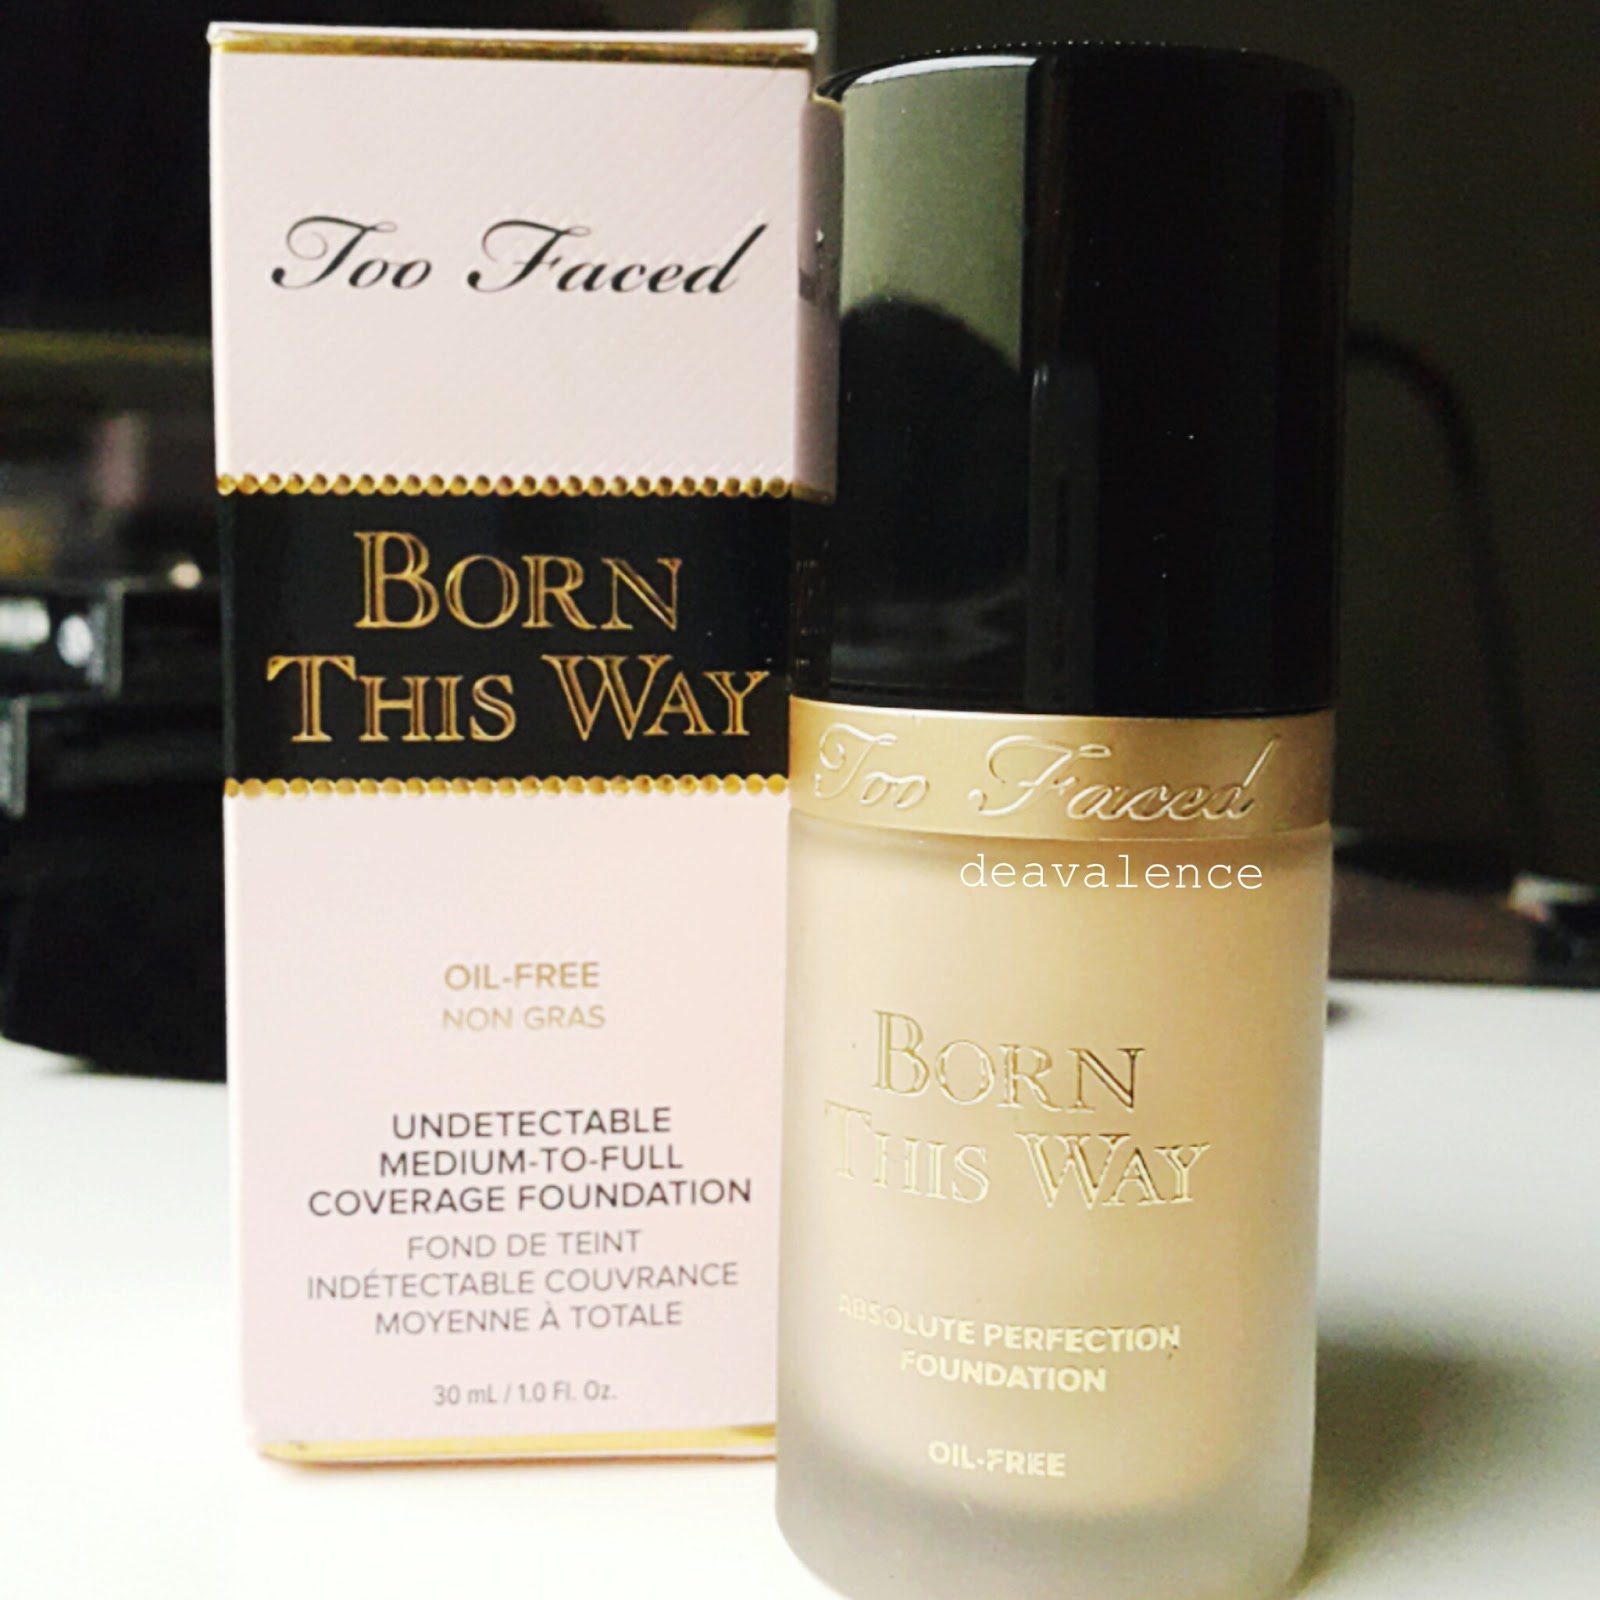 deavalence: Too Faced Born This Way Foundation